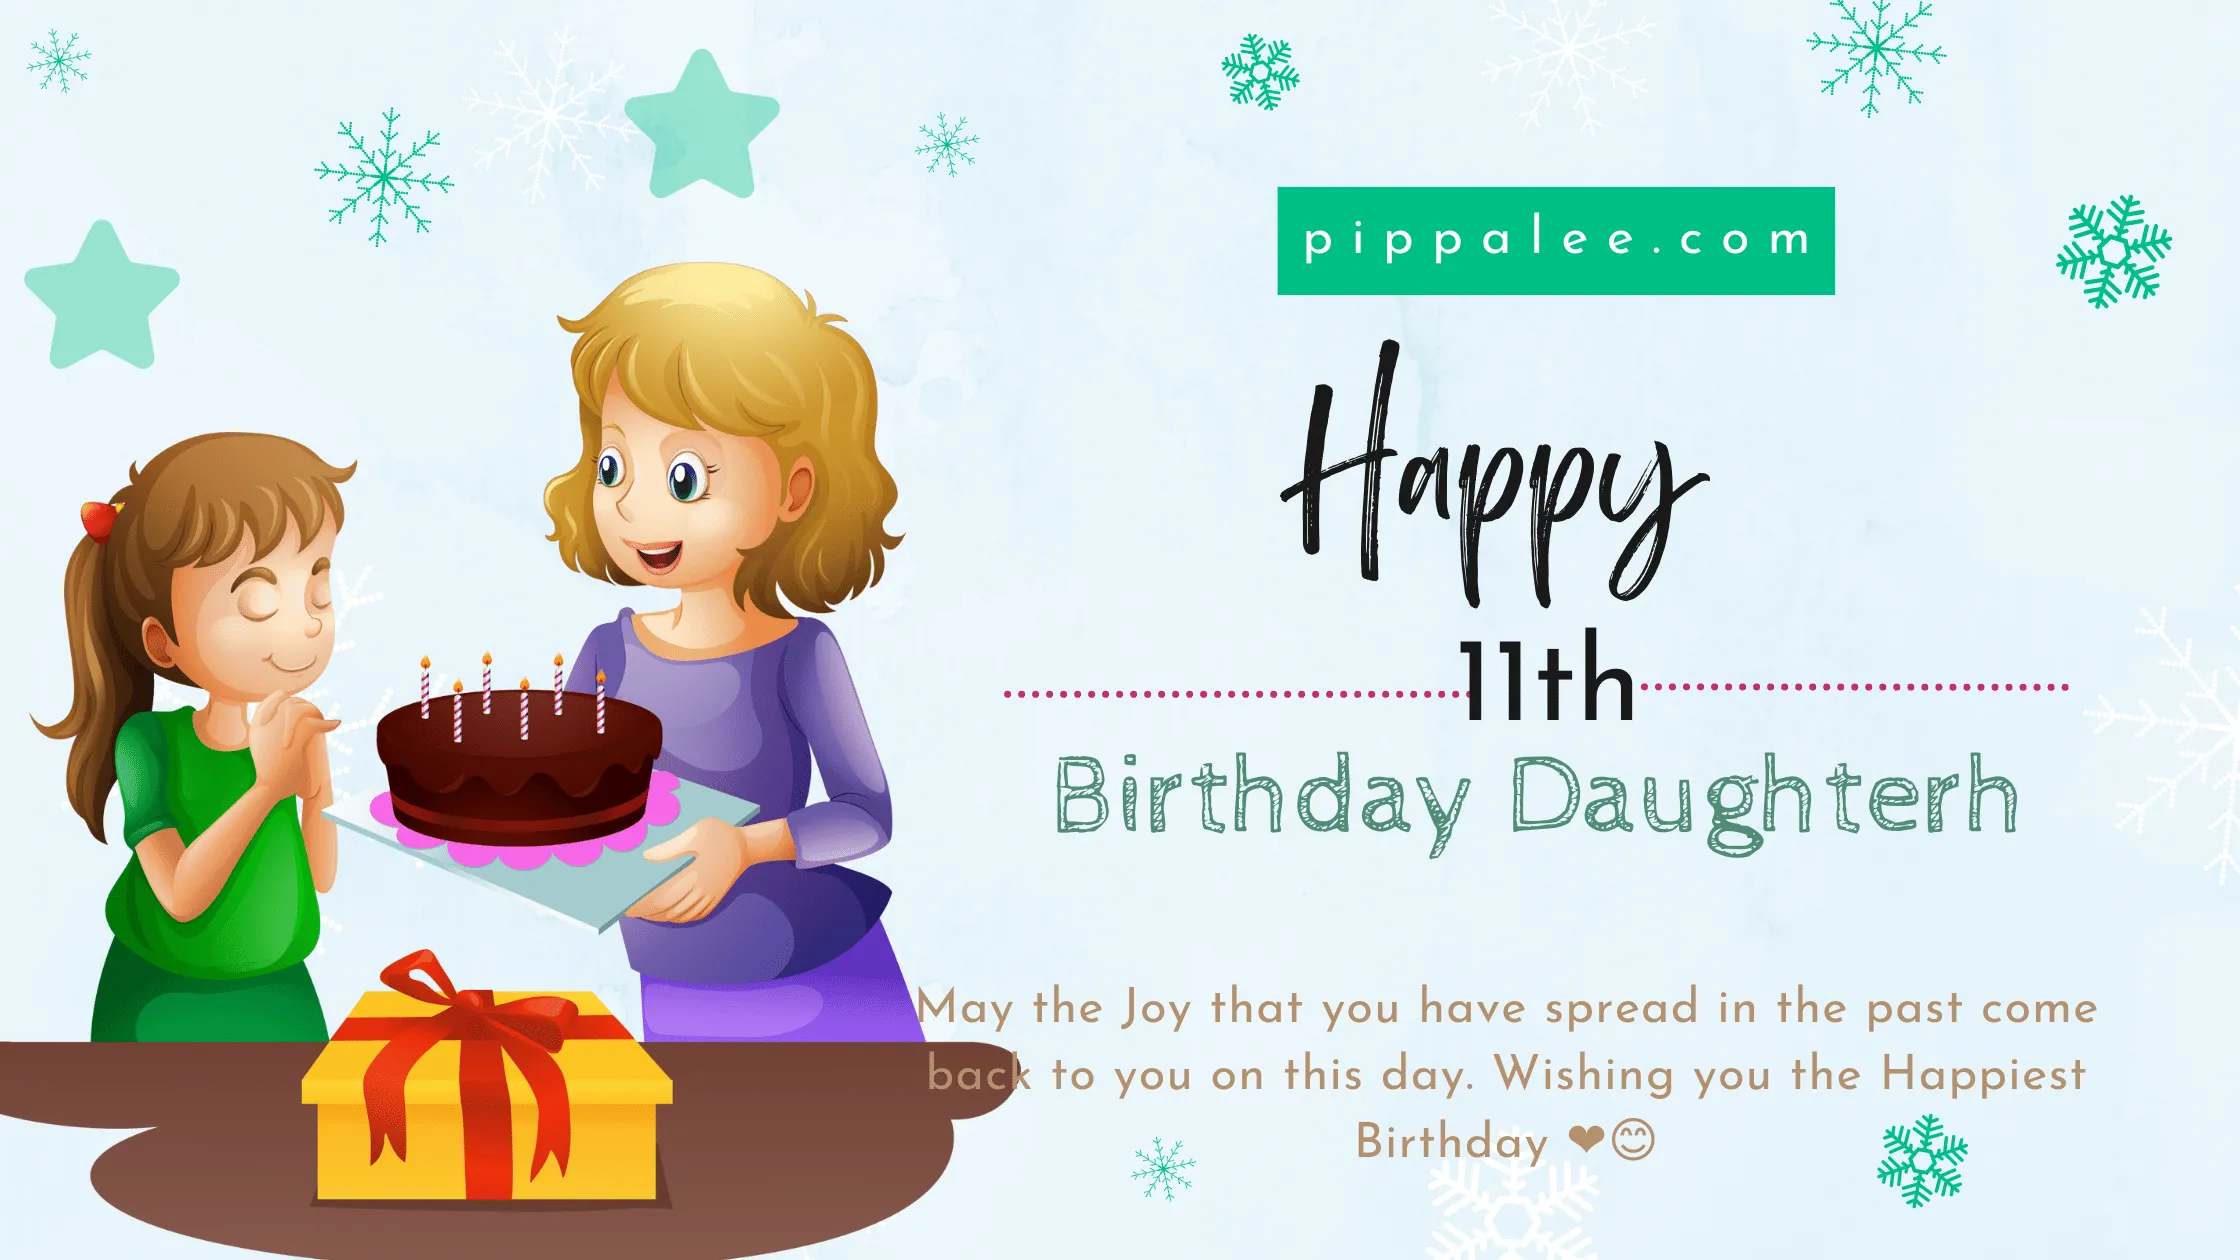 Happy 11th Birthday Daughter - Wishes & Messages